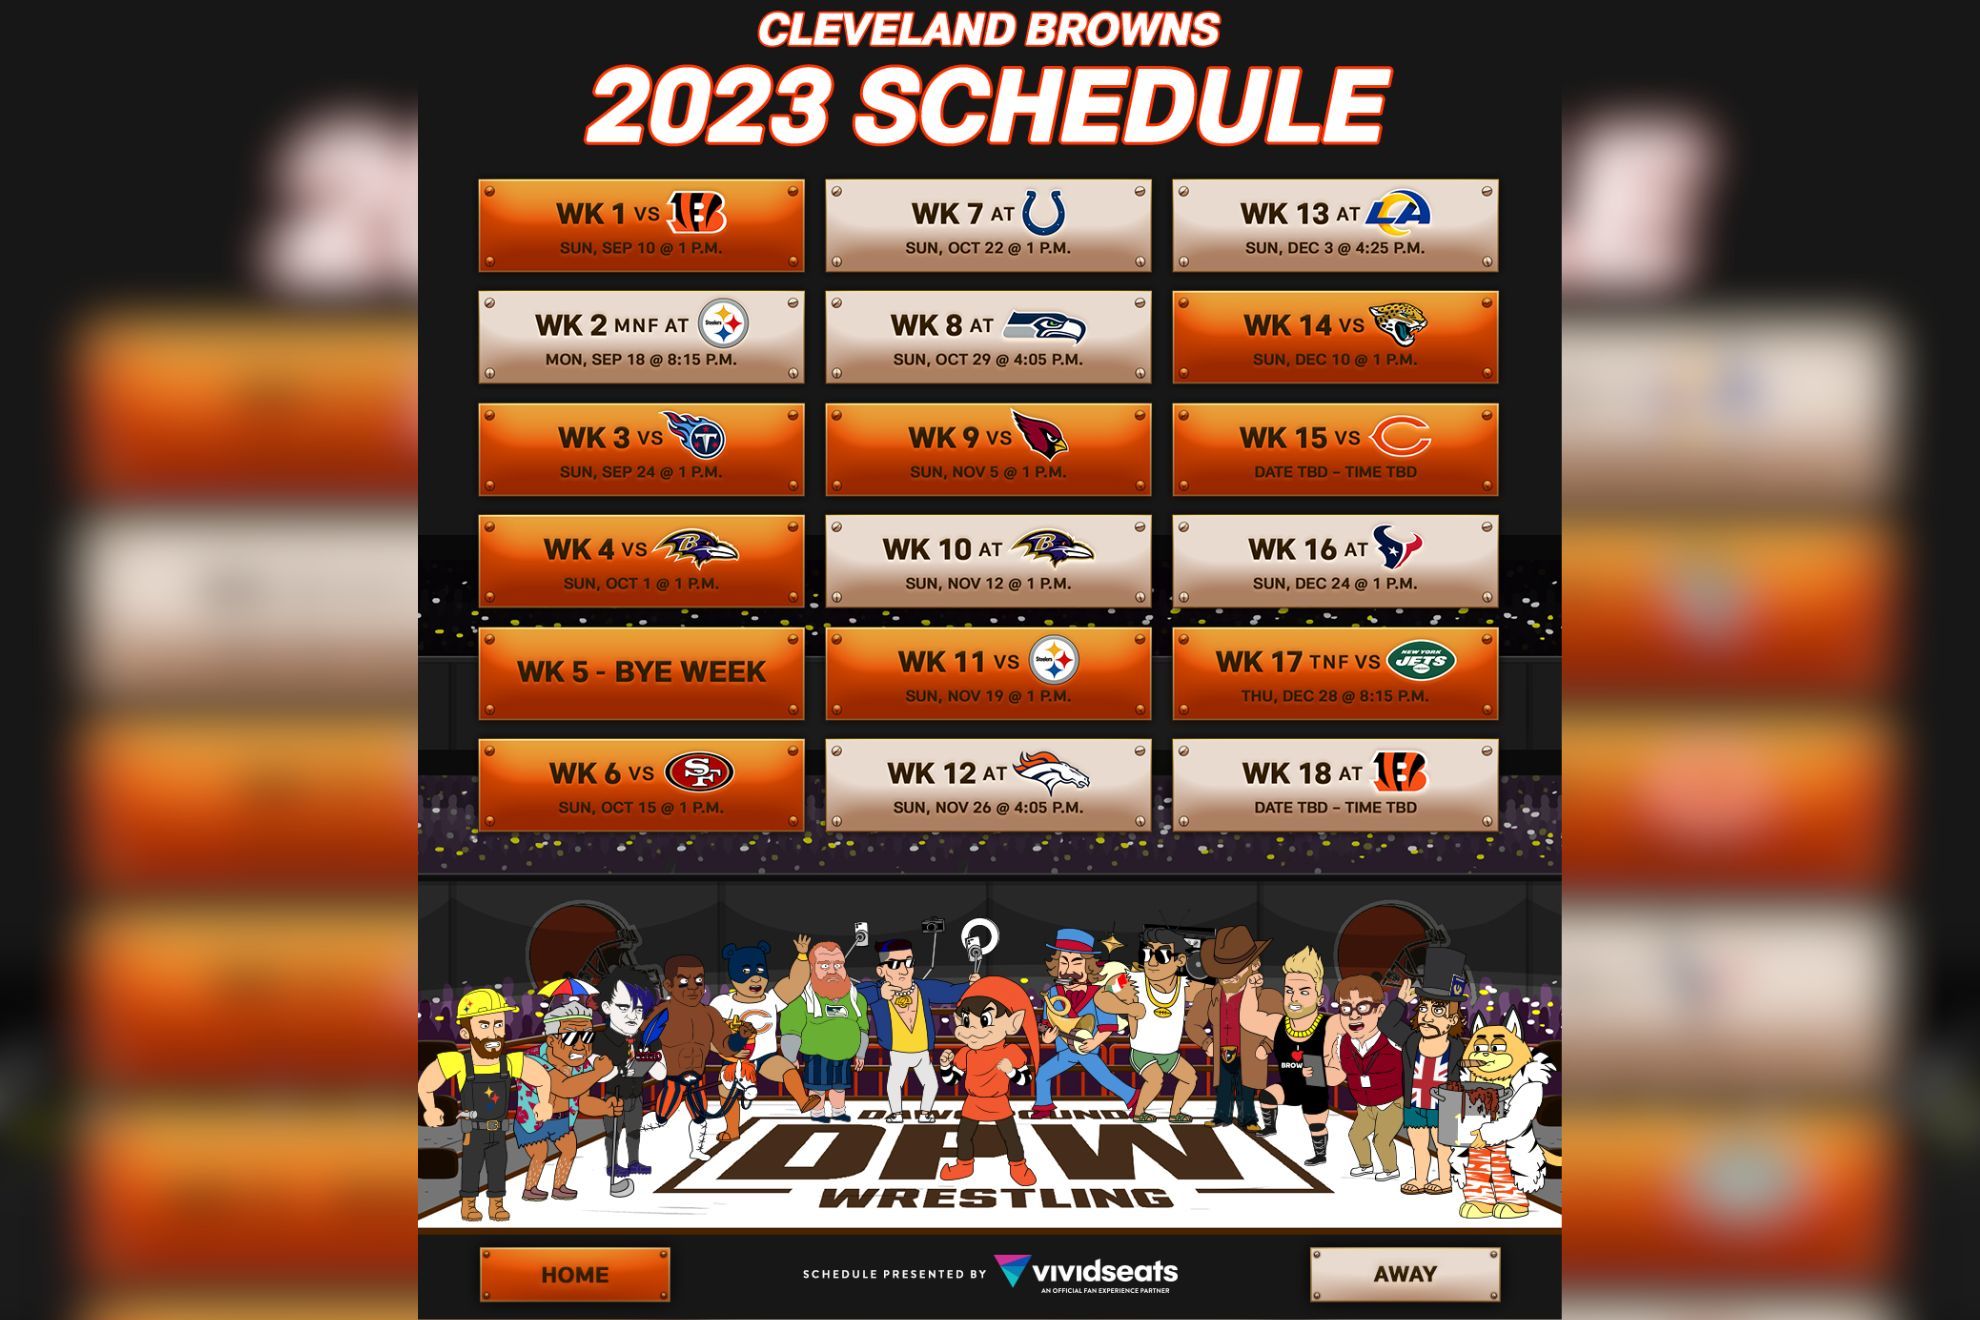 cleveland browns schedule 2021 22 printable